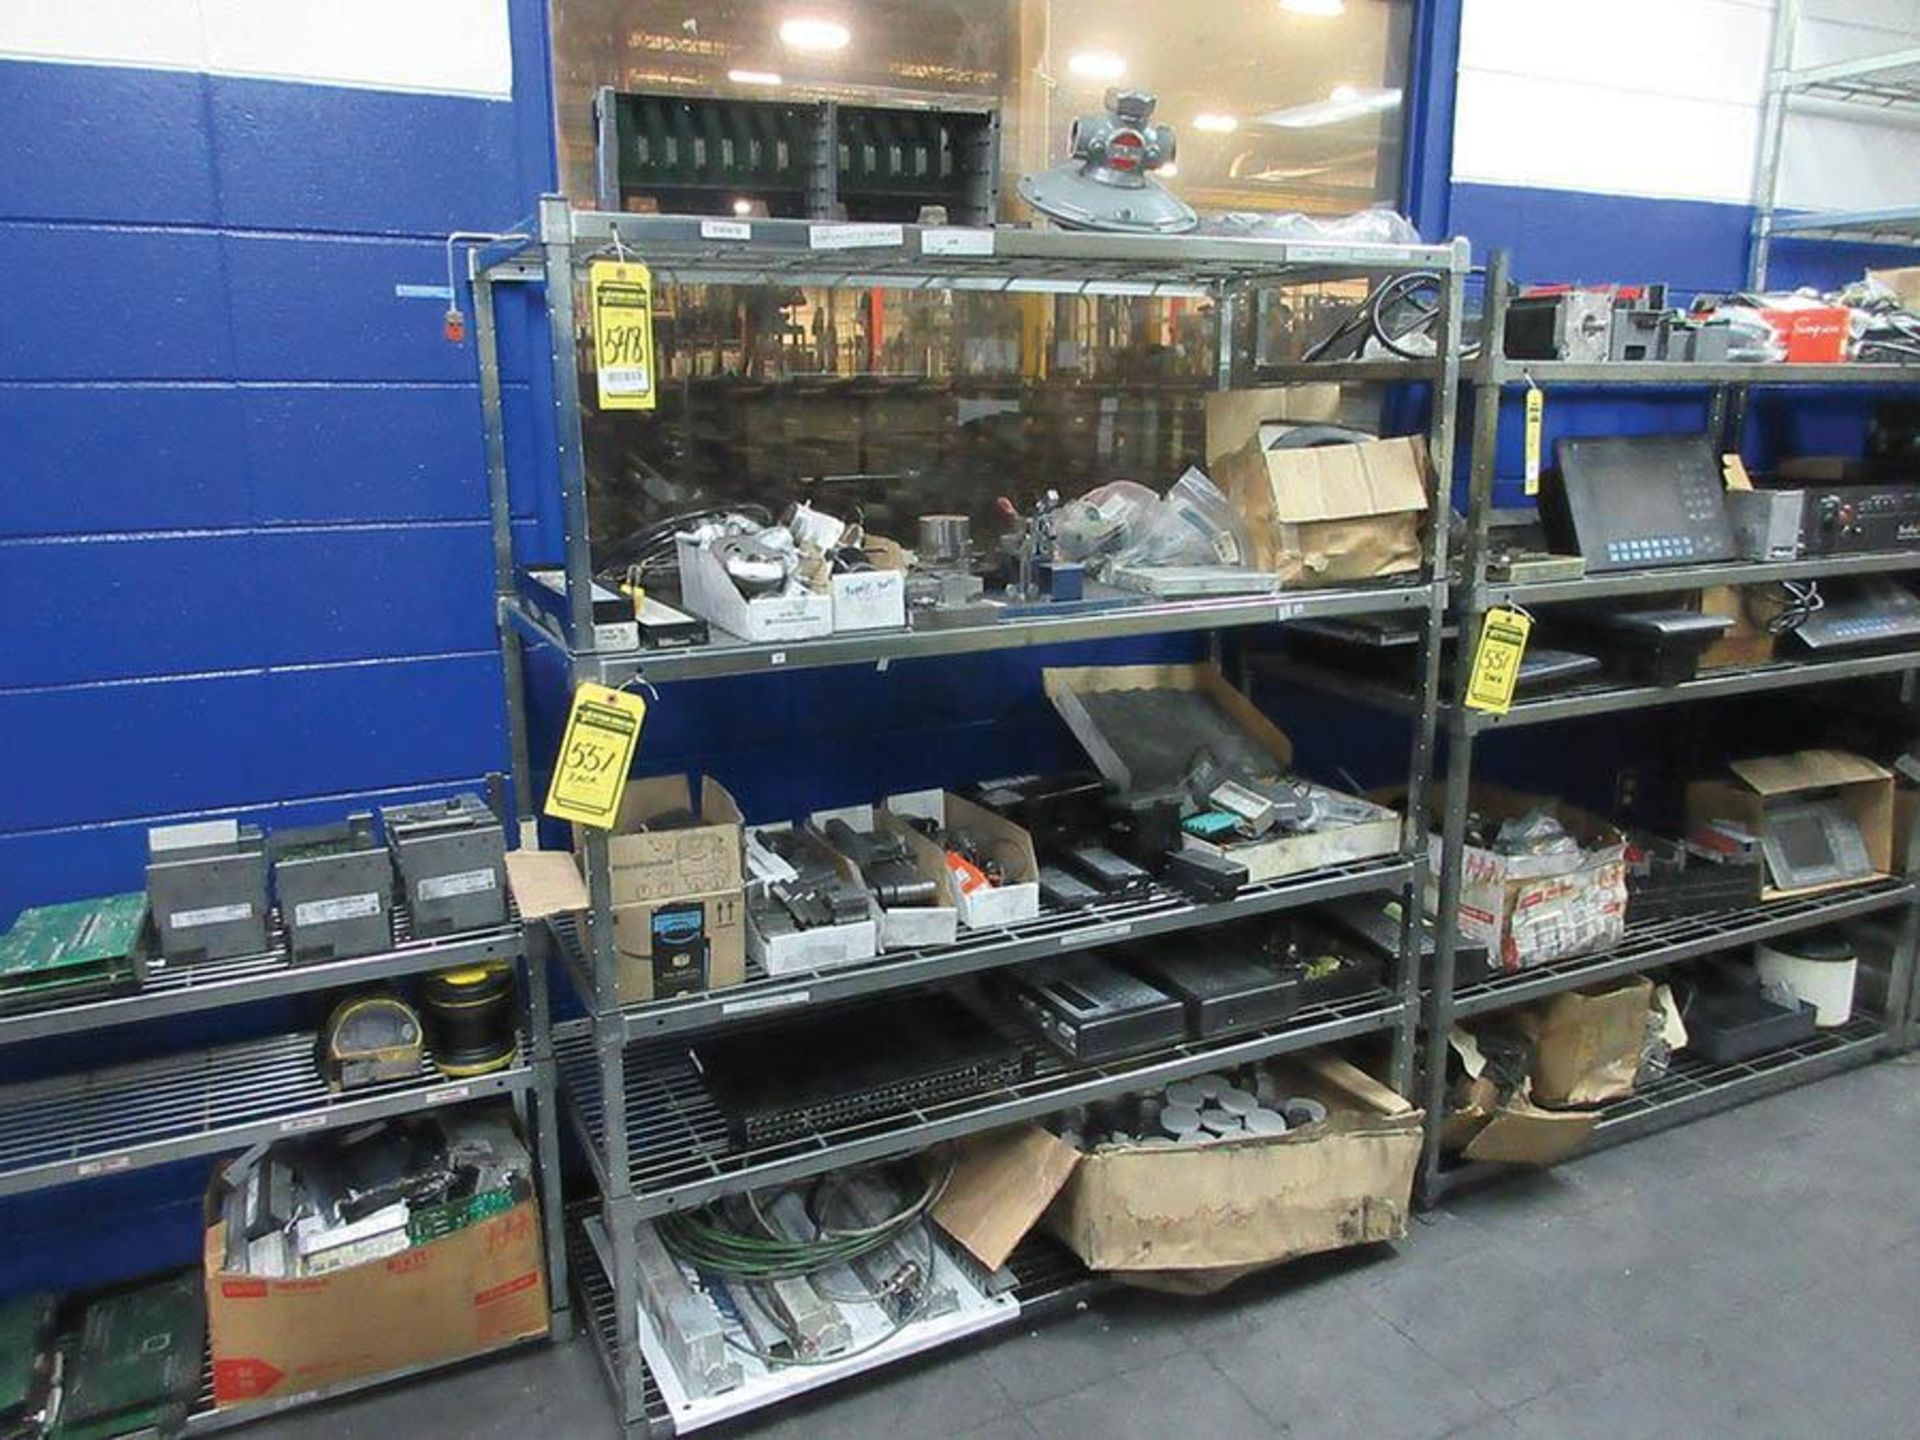 CONTENTS OF RACK: INSPECTION EQUIPMENT, TELESIS PIN STAMP TOUCH PADS AND MORE